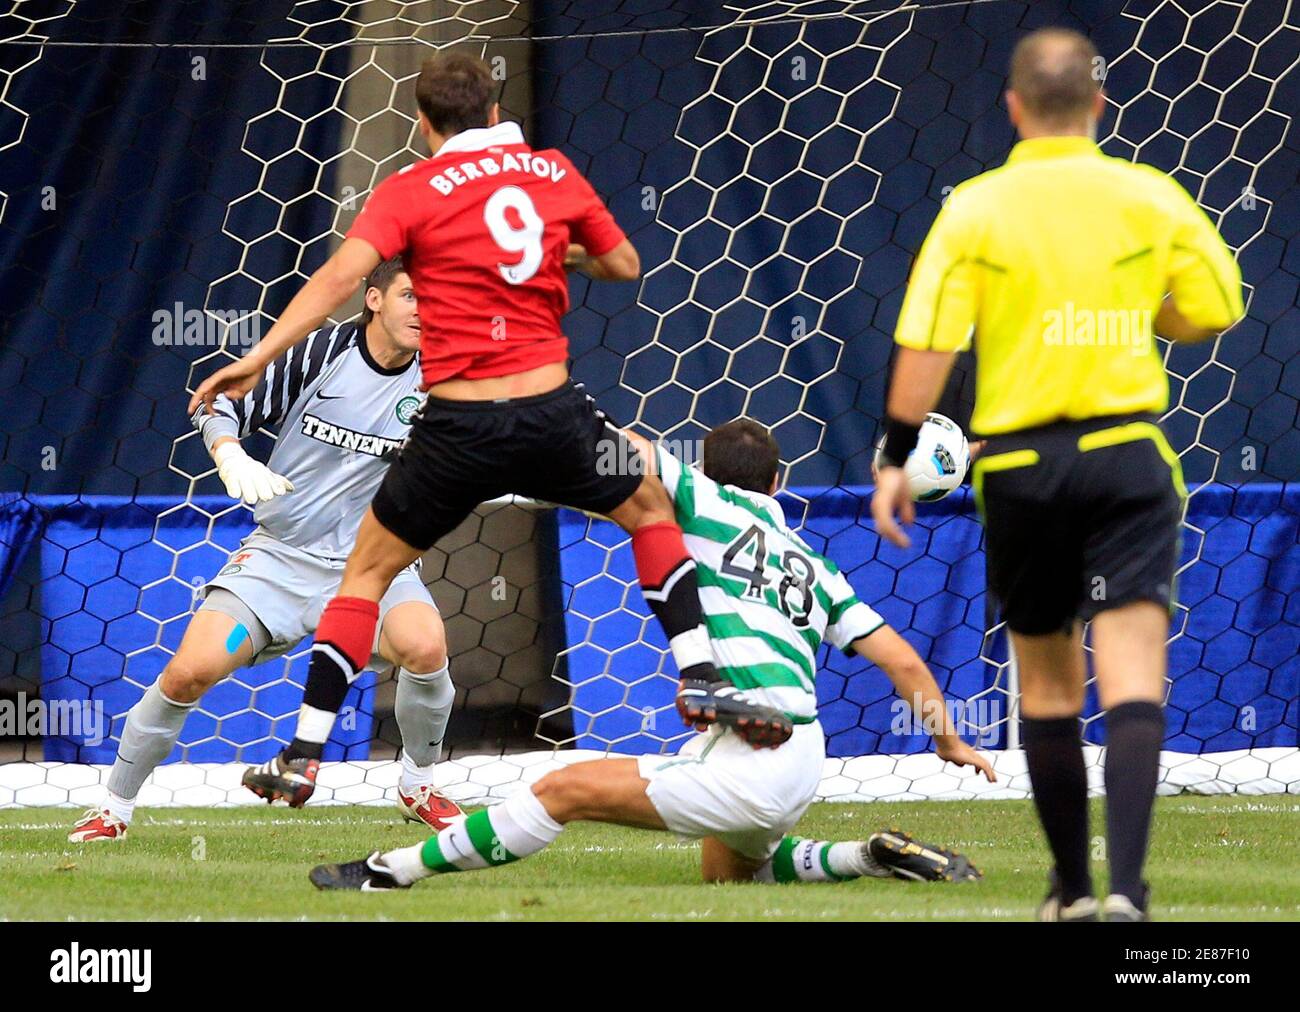 Manchester United forward Dimitar Berbatov (9) scores a goal past Celtic FC defender Darren Odea (48) and goalkeeper Lukask Zaluska (L) during the first half of their friendly soccer match in Toronto July 16, 2010. REUTERS/ Mike Cassese   (CANADA - Tags: SPORT SOCCER) Stock Photo